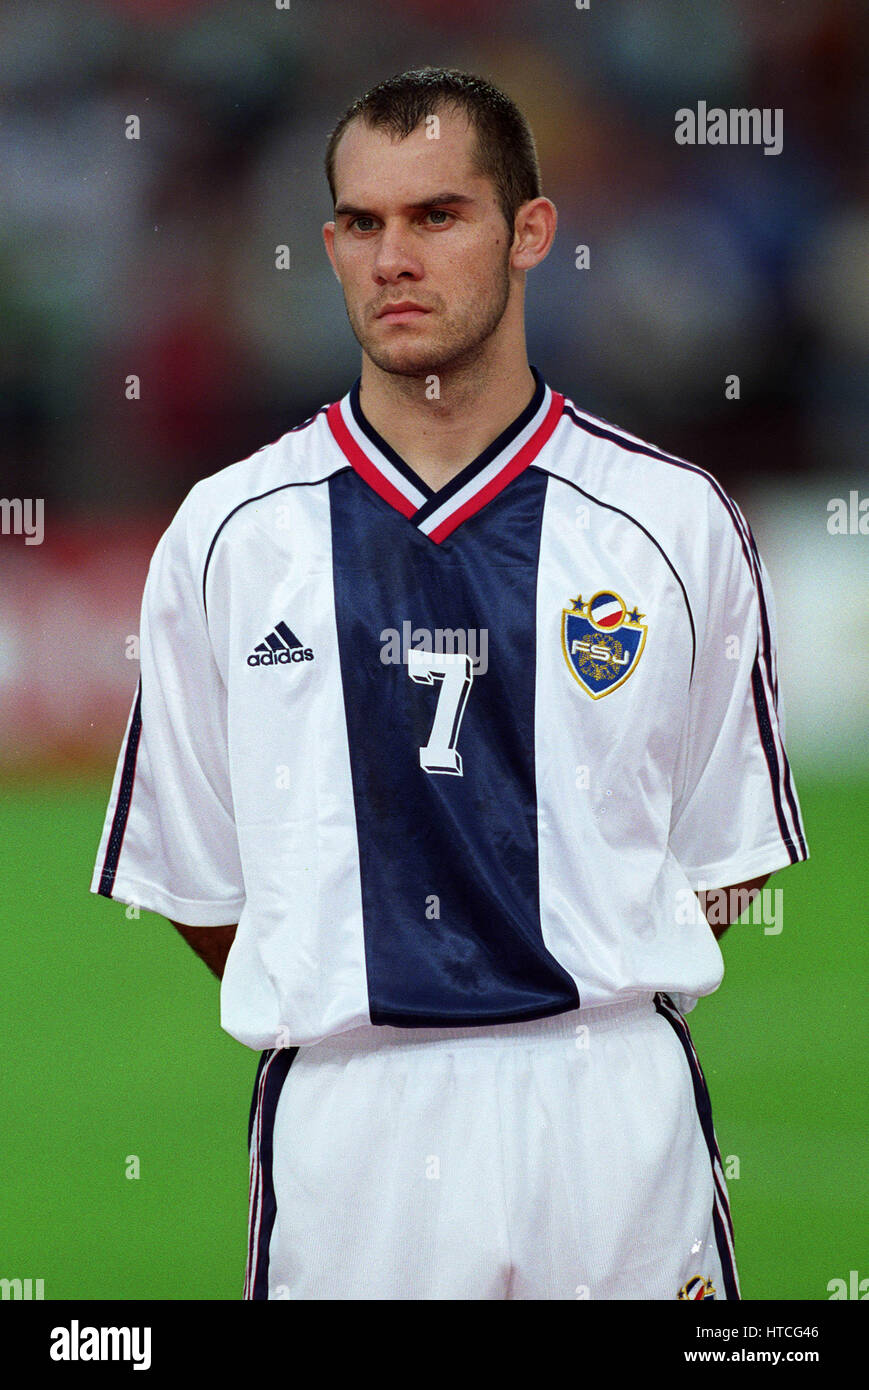 ALBERT NAD YOUGOSLAVIE & REAL OVIEDO 01 Septembre 1999 Banque D'Images